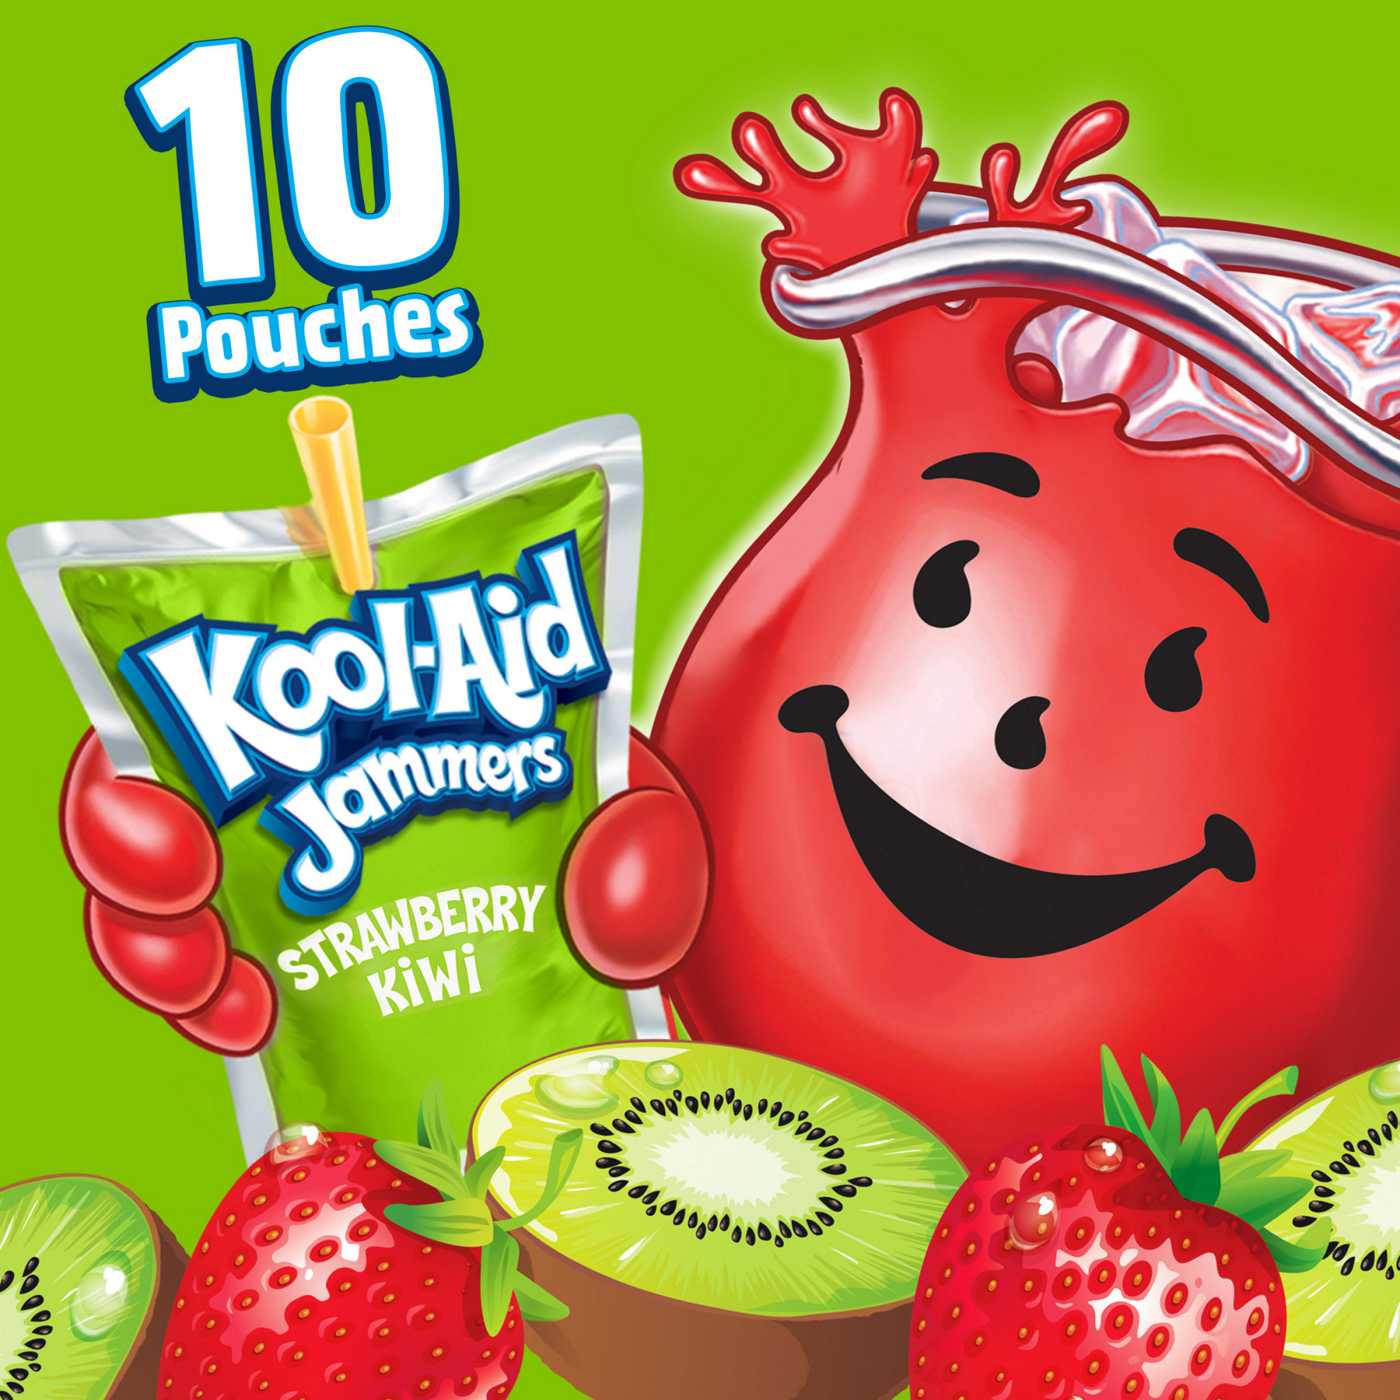 Kool-Aid Jammers Strawberry Kiwi Flavored Drink 6 oz Pouches; image 5 of 7